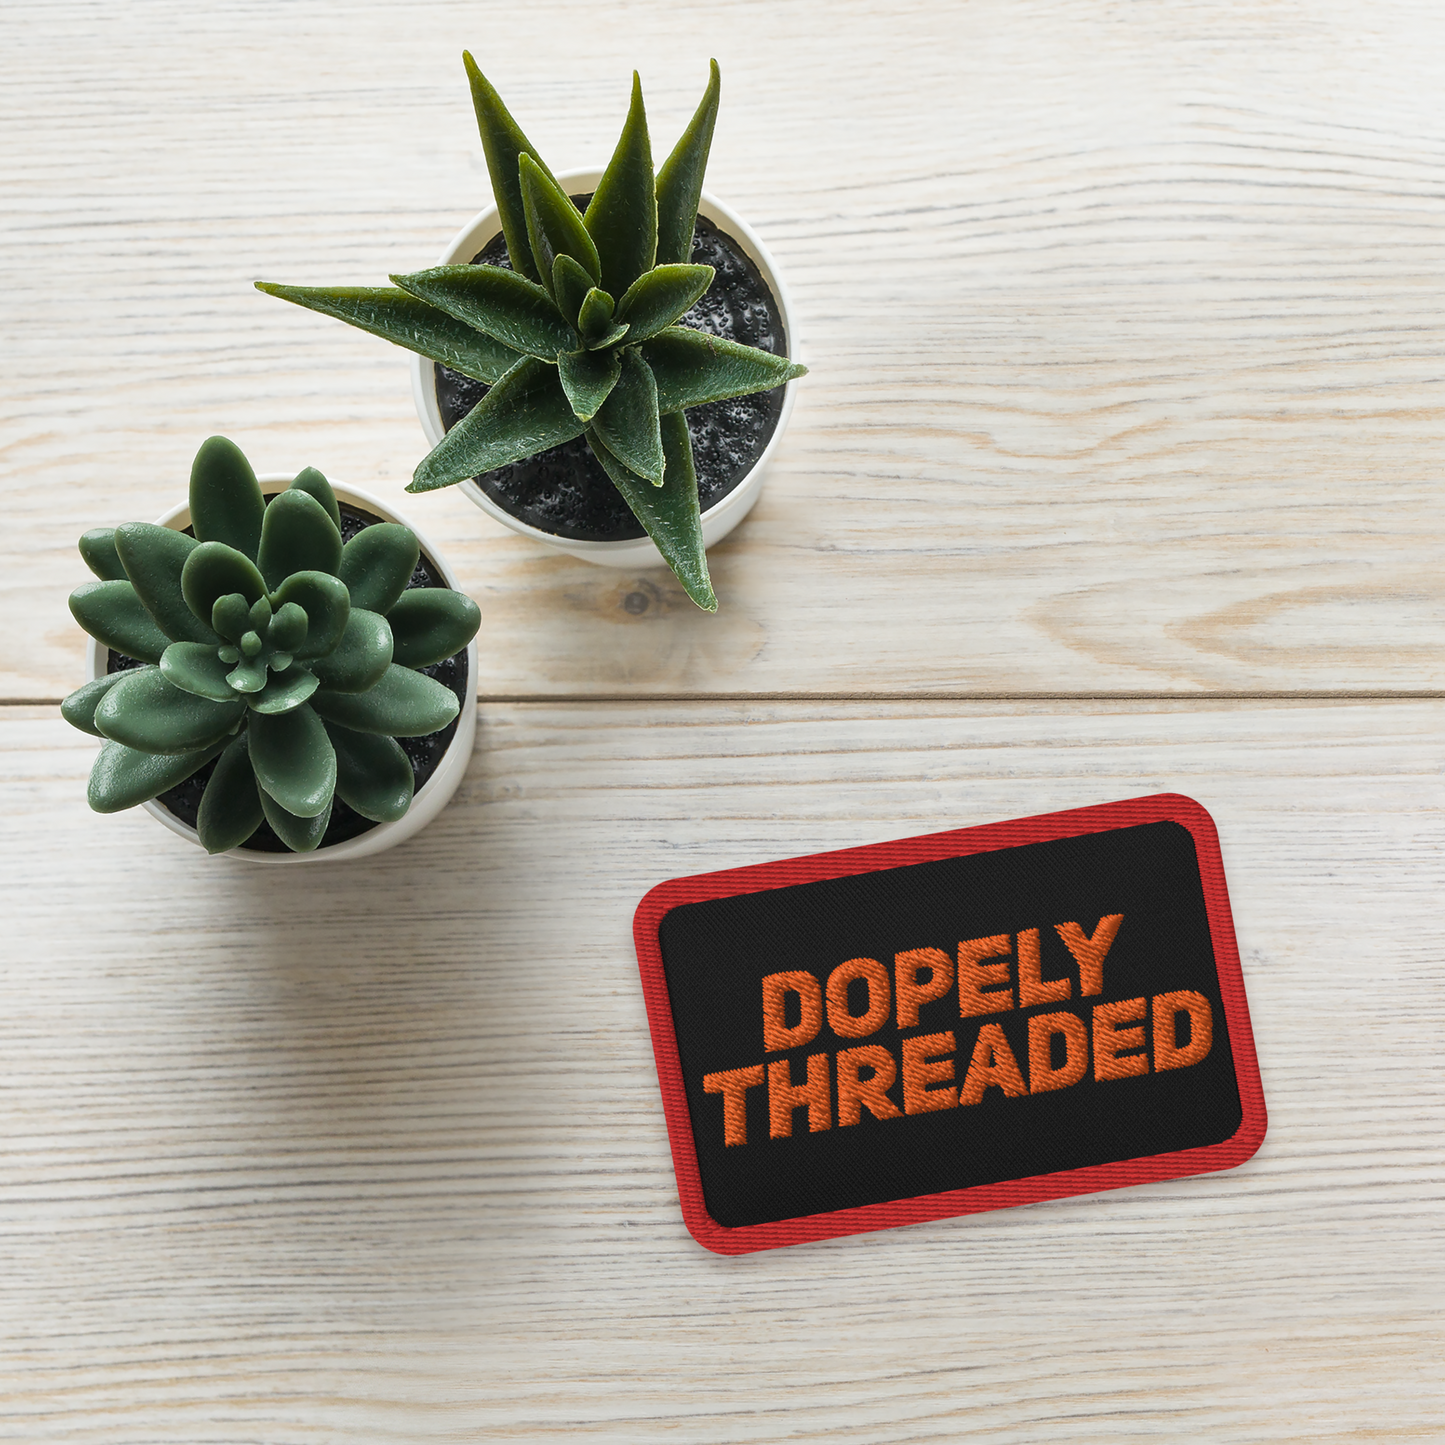 Red Leddr Embroidered patches